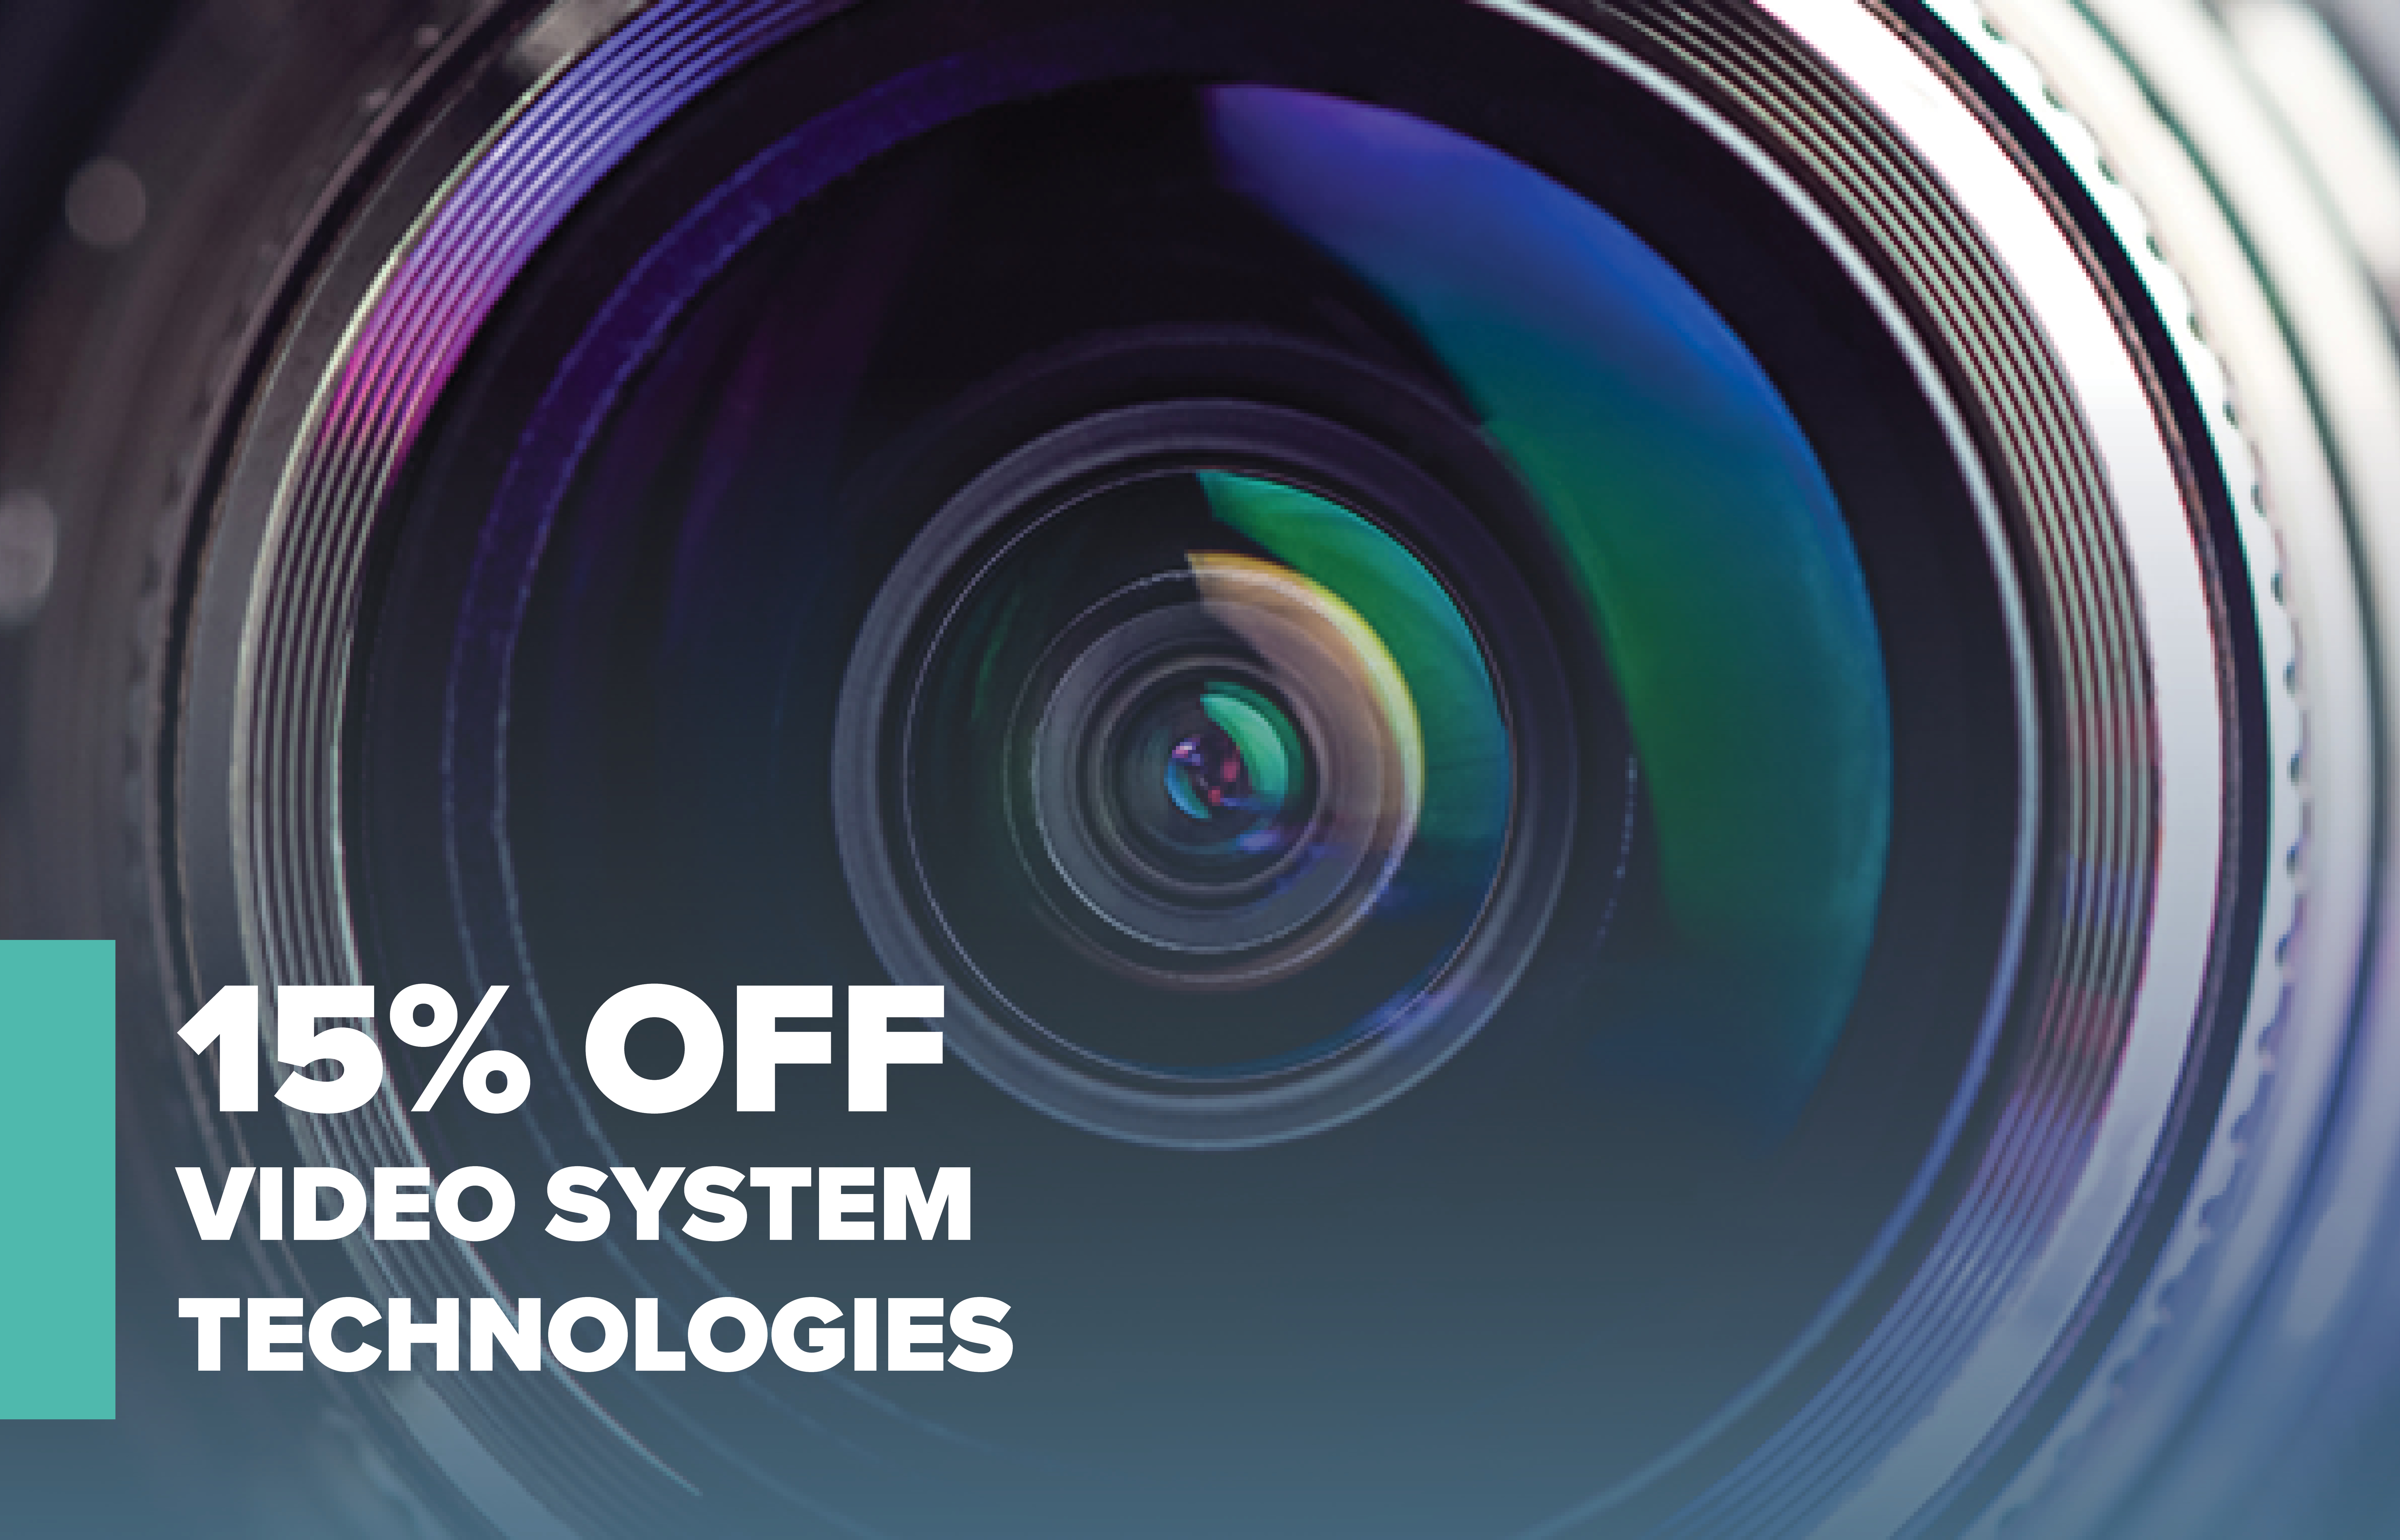 Save 15% on Video System Technologies Course Through May